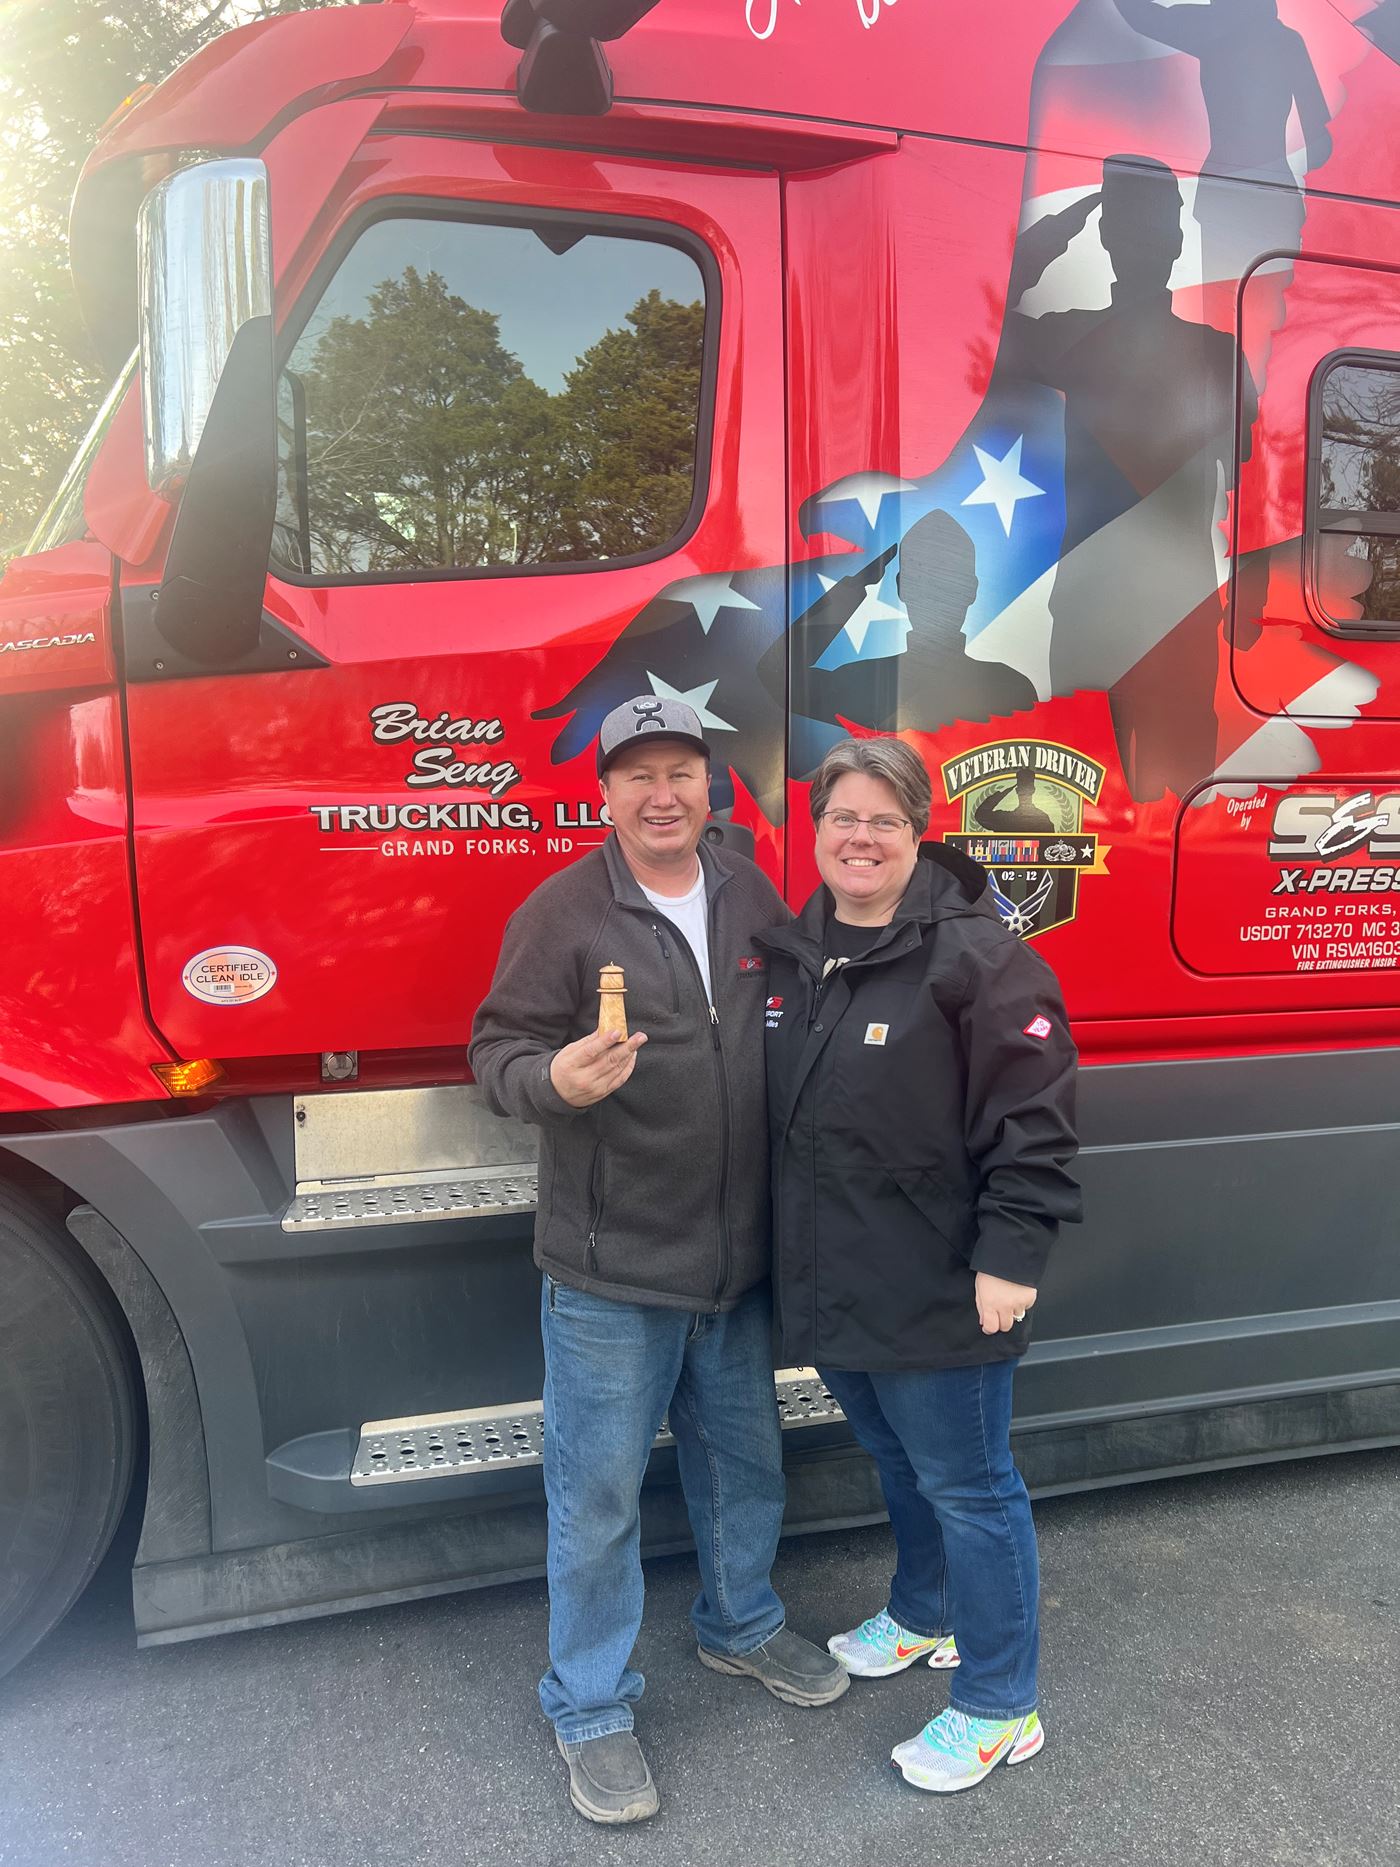 Jill and Jason with their gift from location coordinator - a token of thanks for their sacrifice to deliver wreaths from Maine to Shiloh, TN.&nbsp;&nbsp;